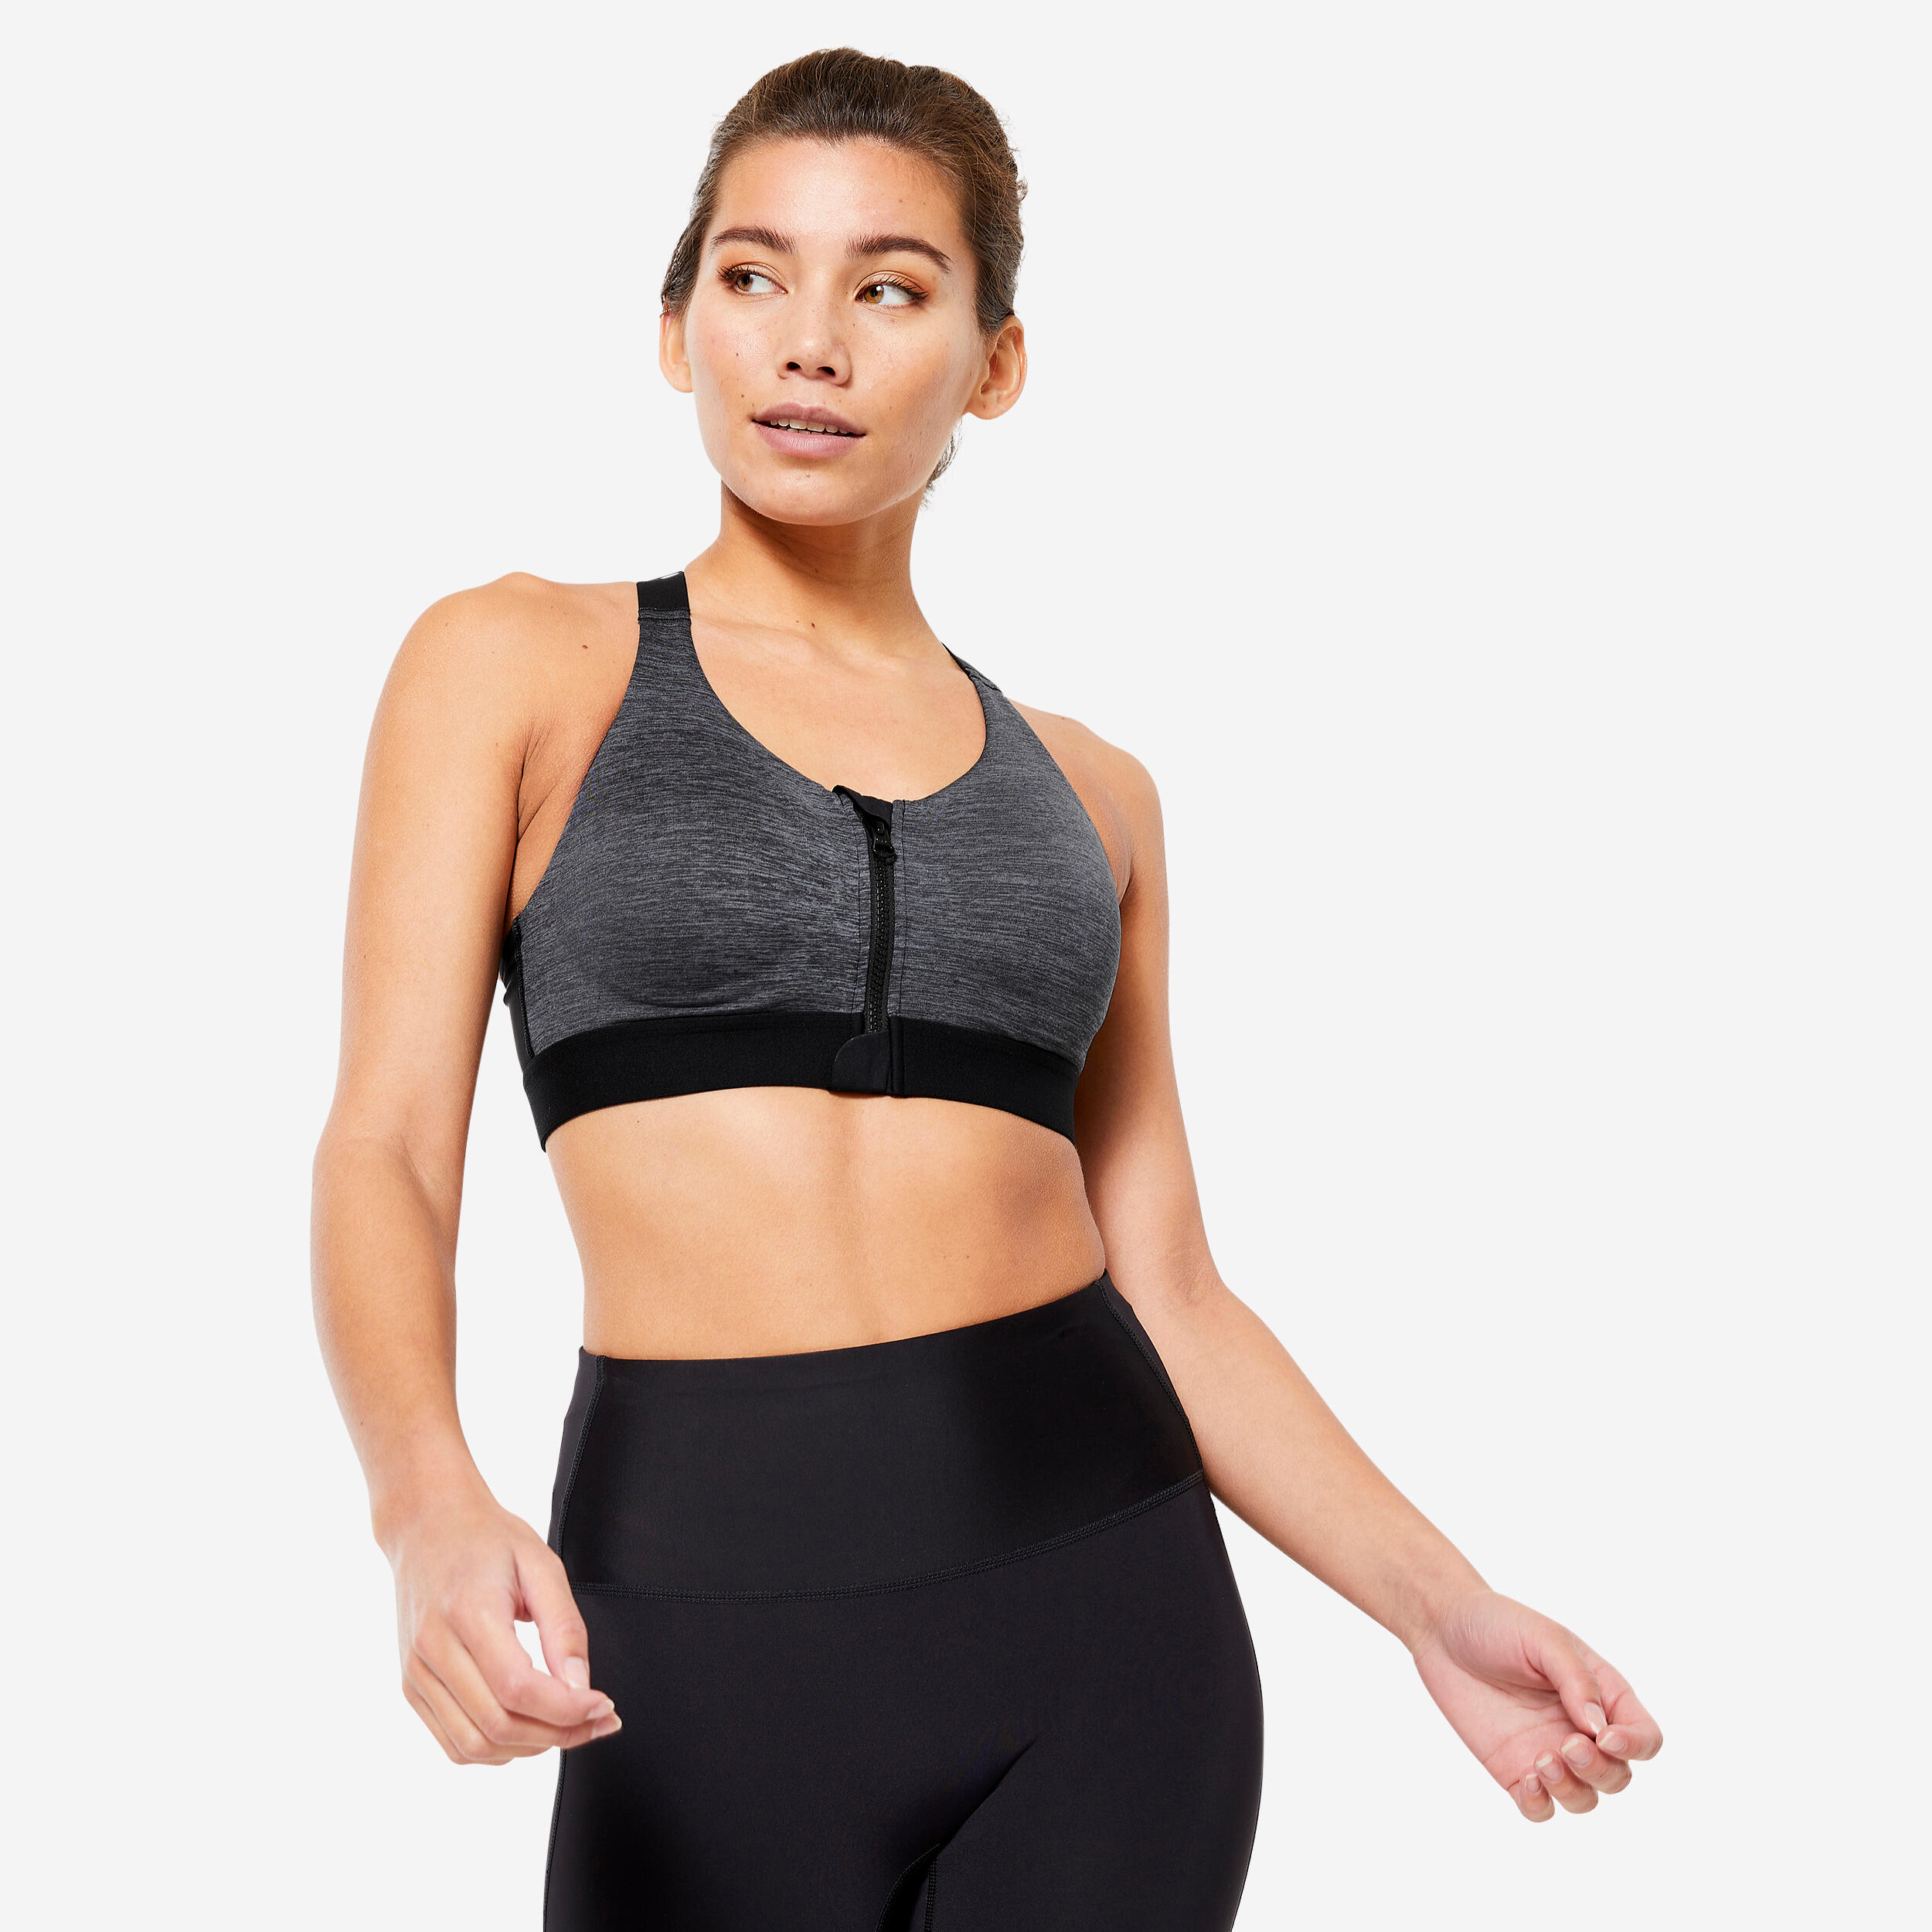 DOMYOS Women's High Support Zip-Up Sports Bra with Cups - Black/Grey